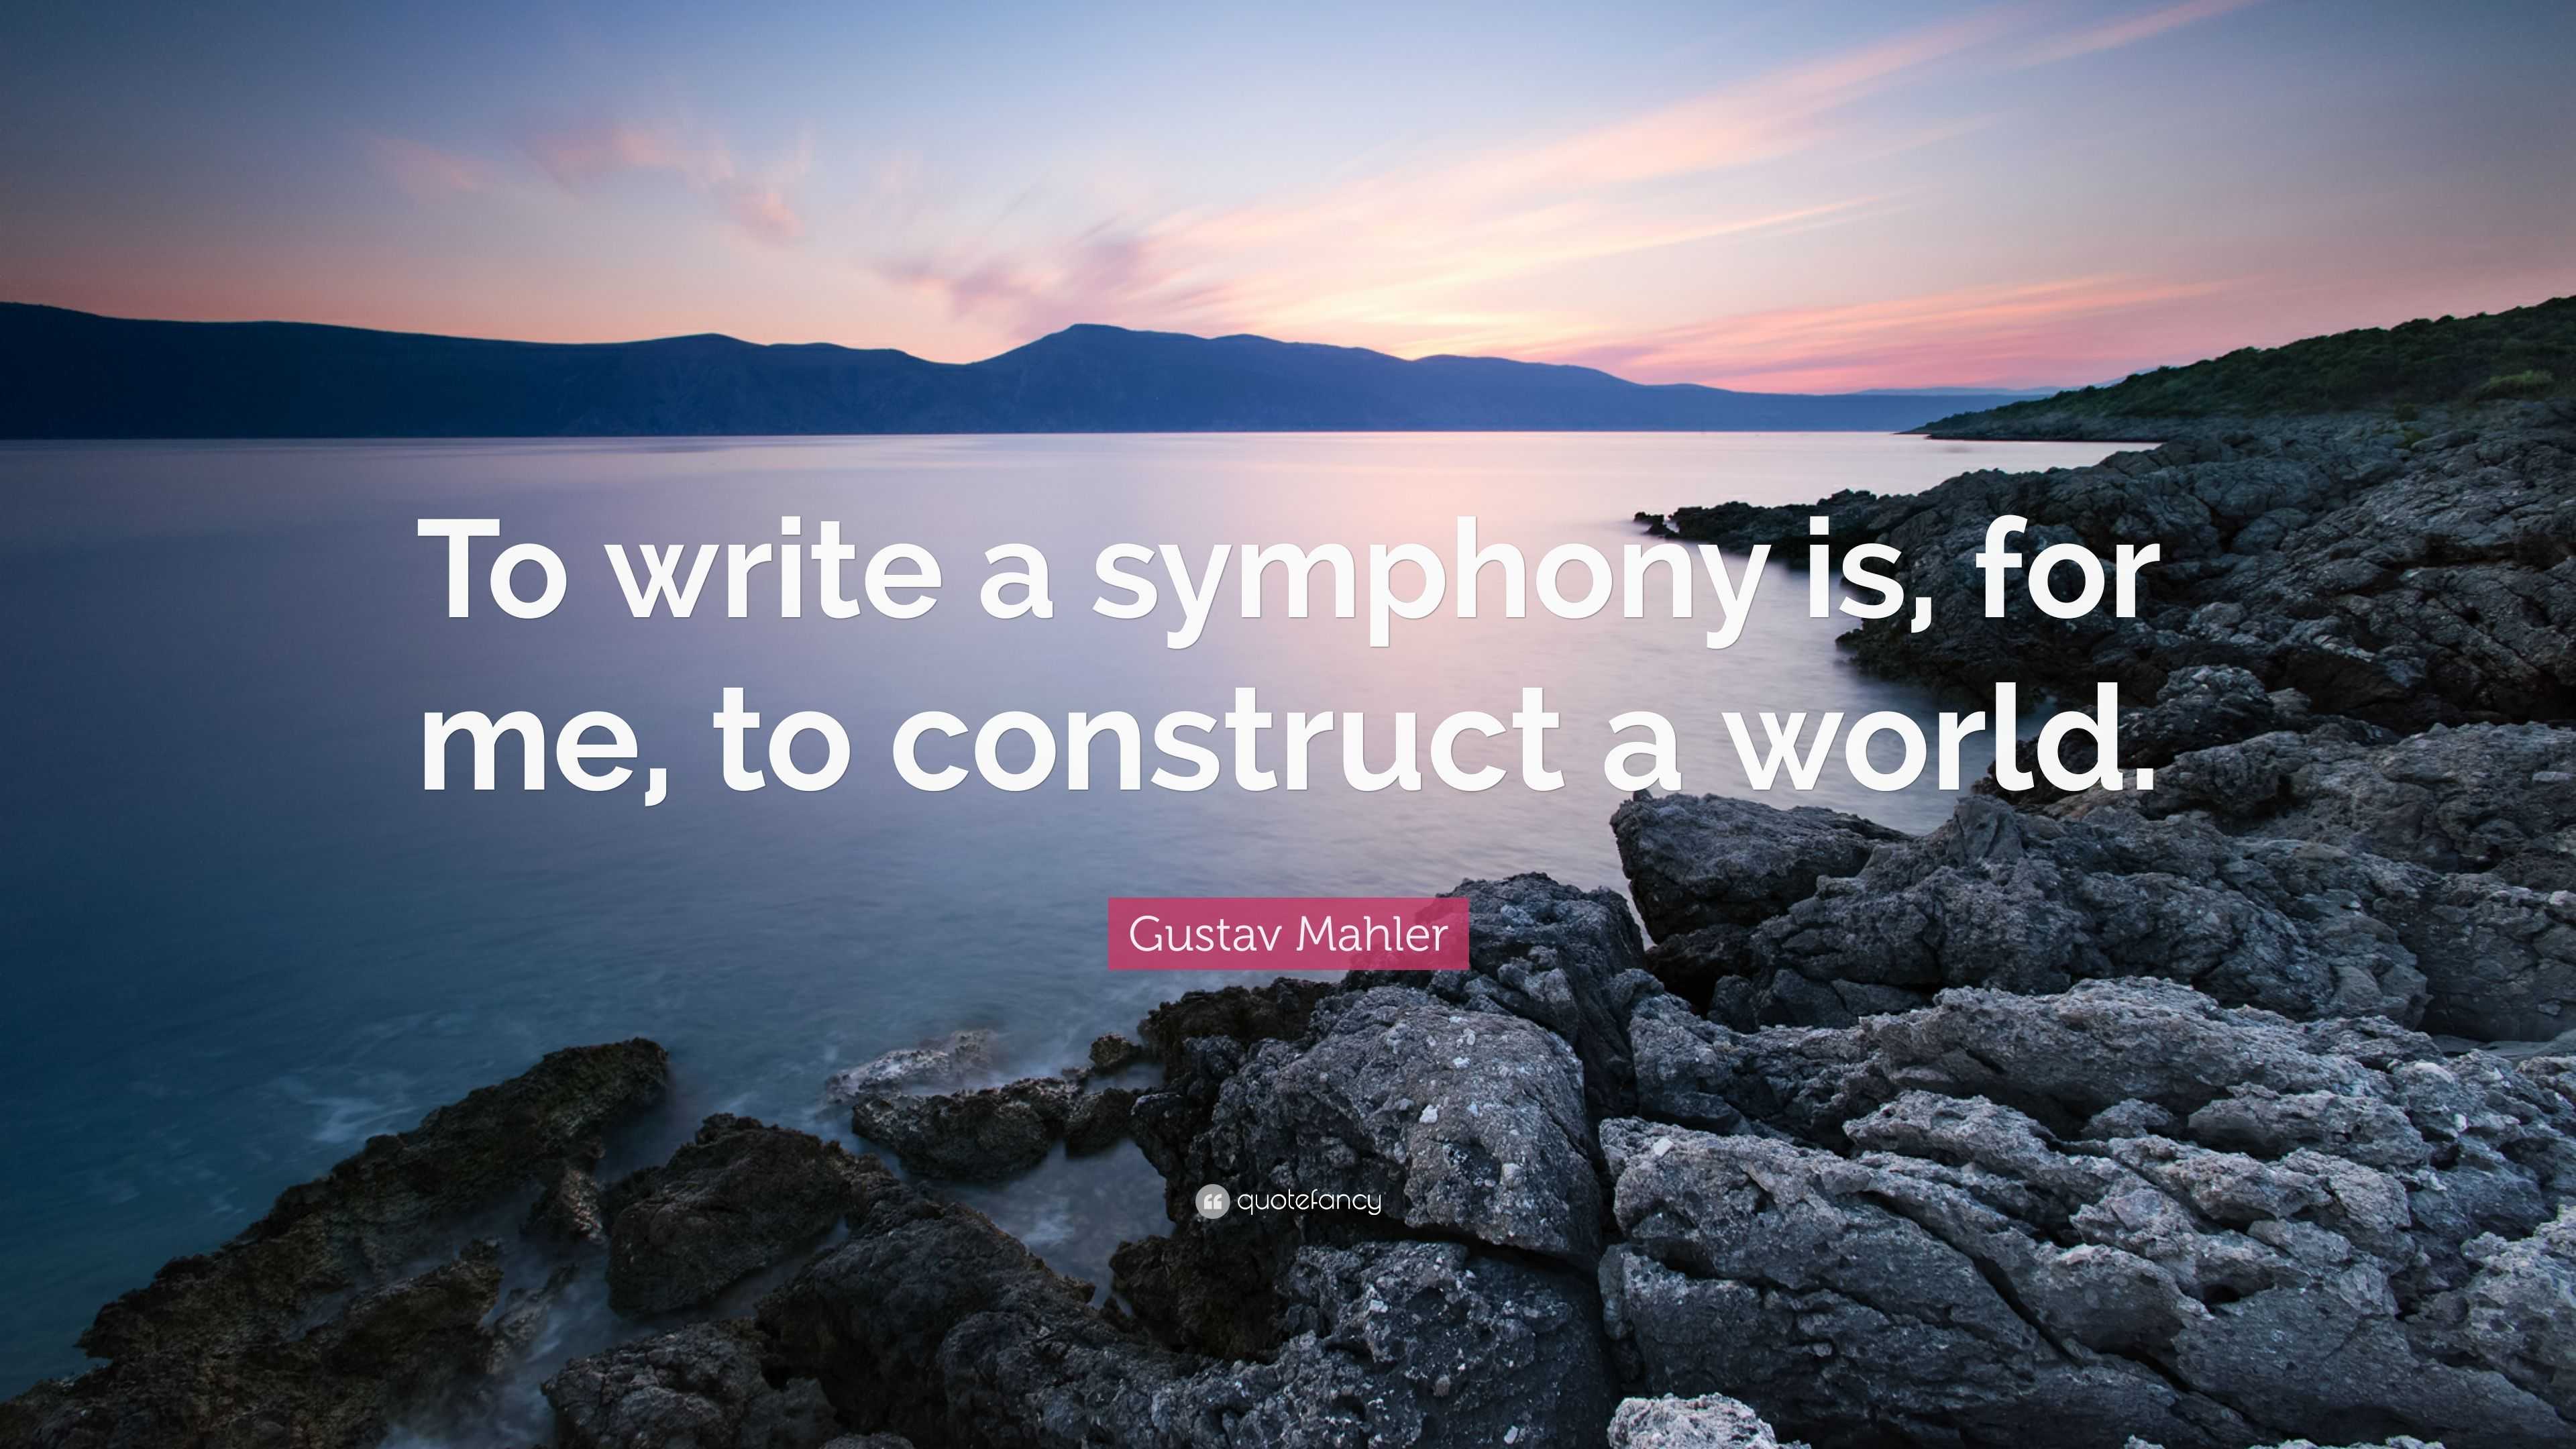 Gustav Mahler Quote: “To write a symphony is, for me, to construct